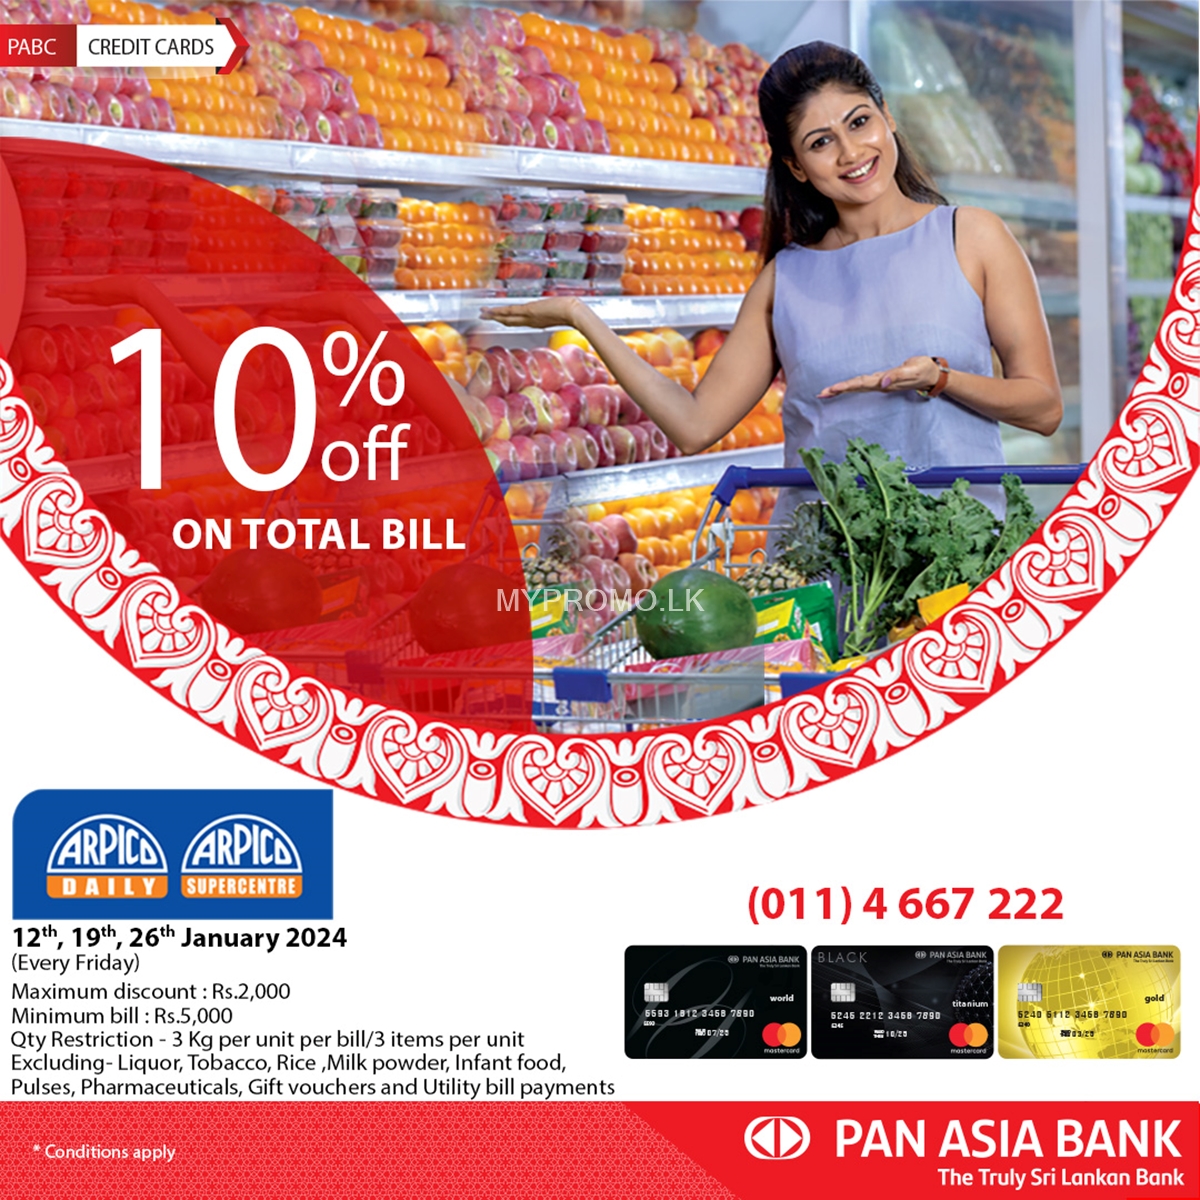 Get 10% off on total bill at Arpico Supercentre with Pan Asia Bank Credit Cards